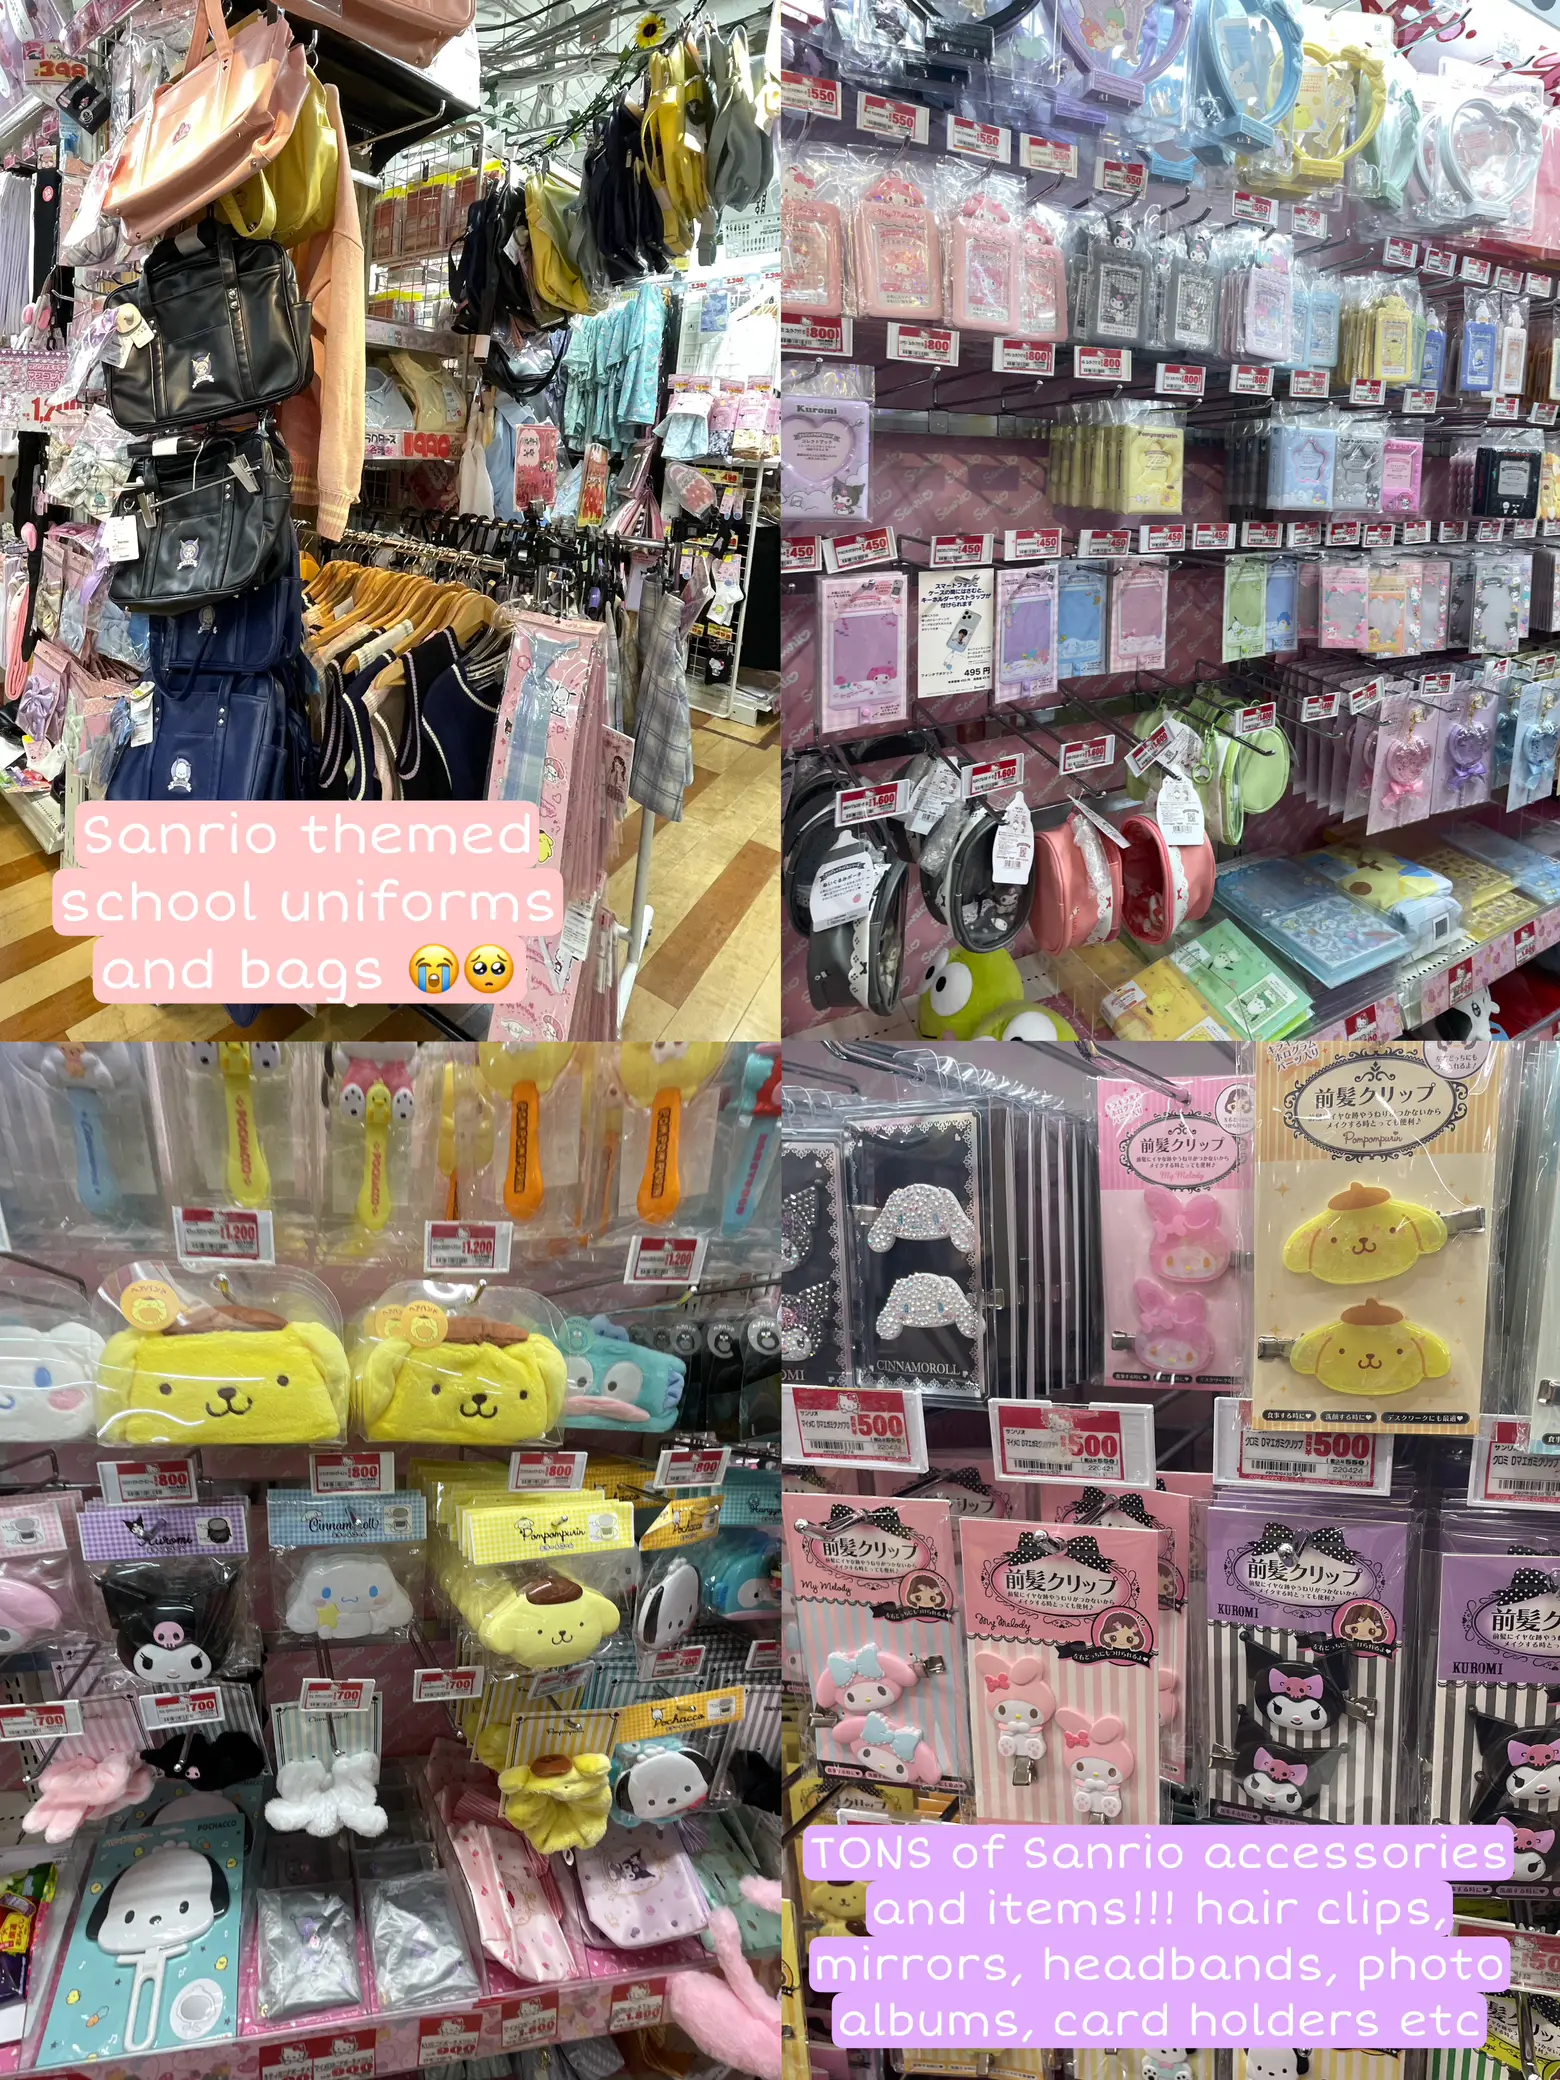 MUST BUY products from Japan’s Don Don Donki's images(9)